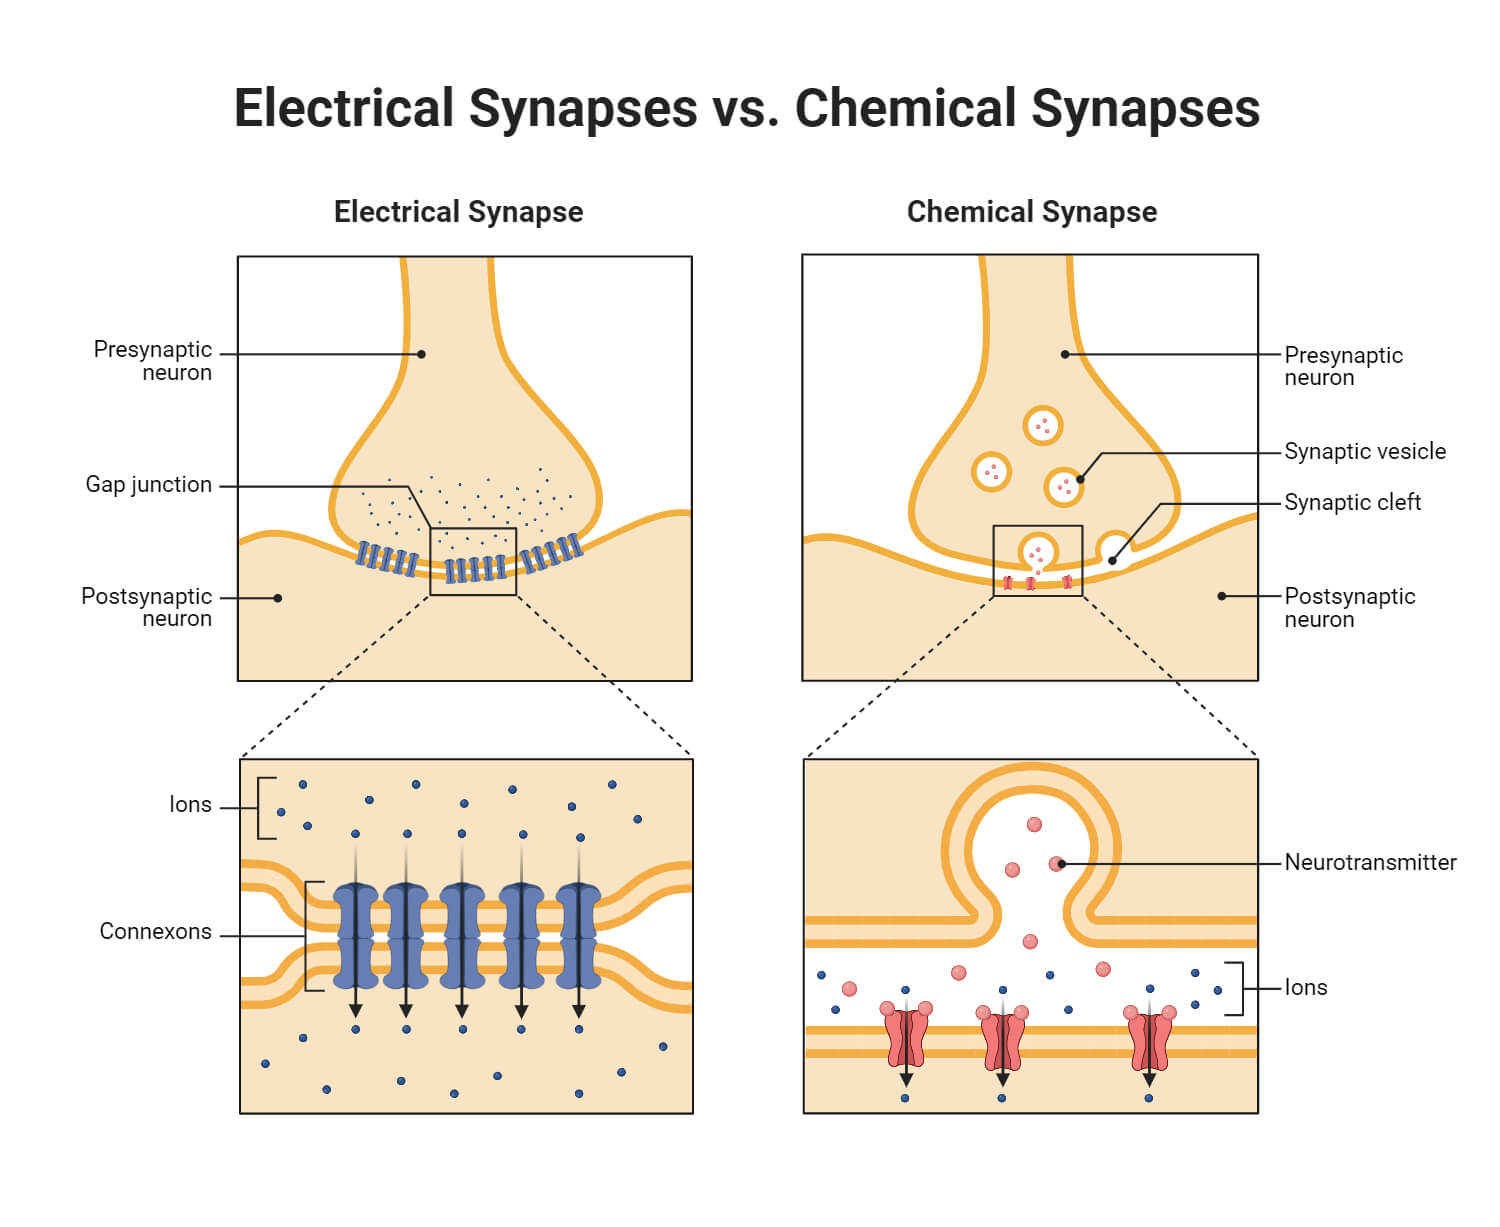 Electrical Synapses vs. Chemical Synapses